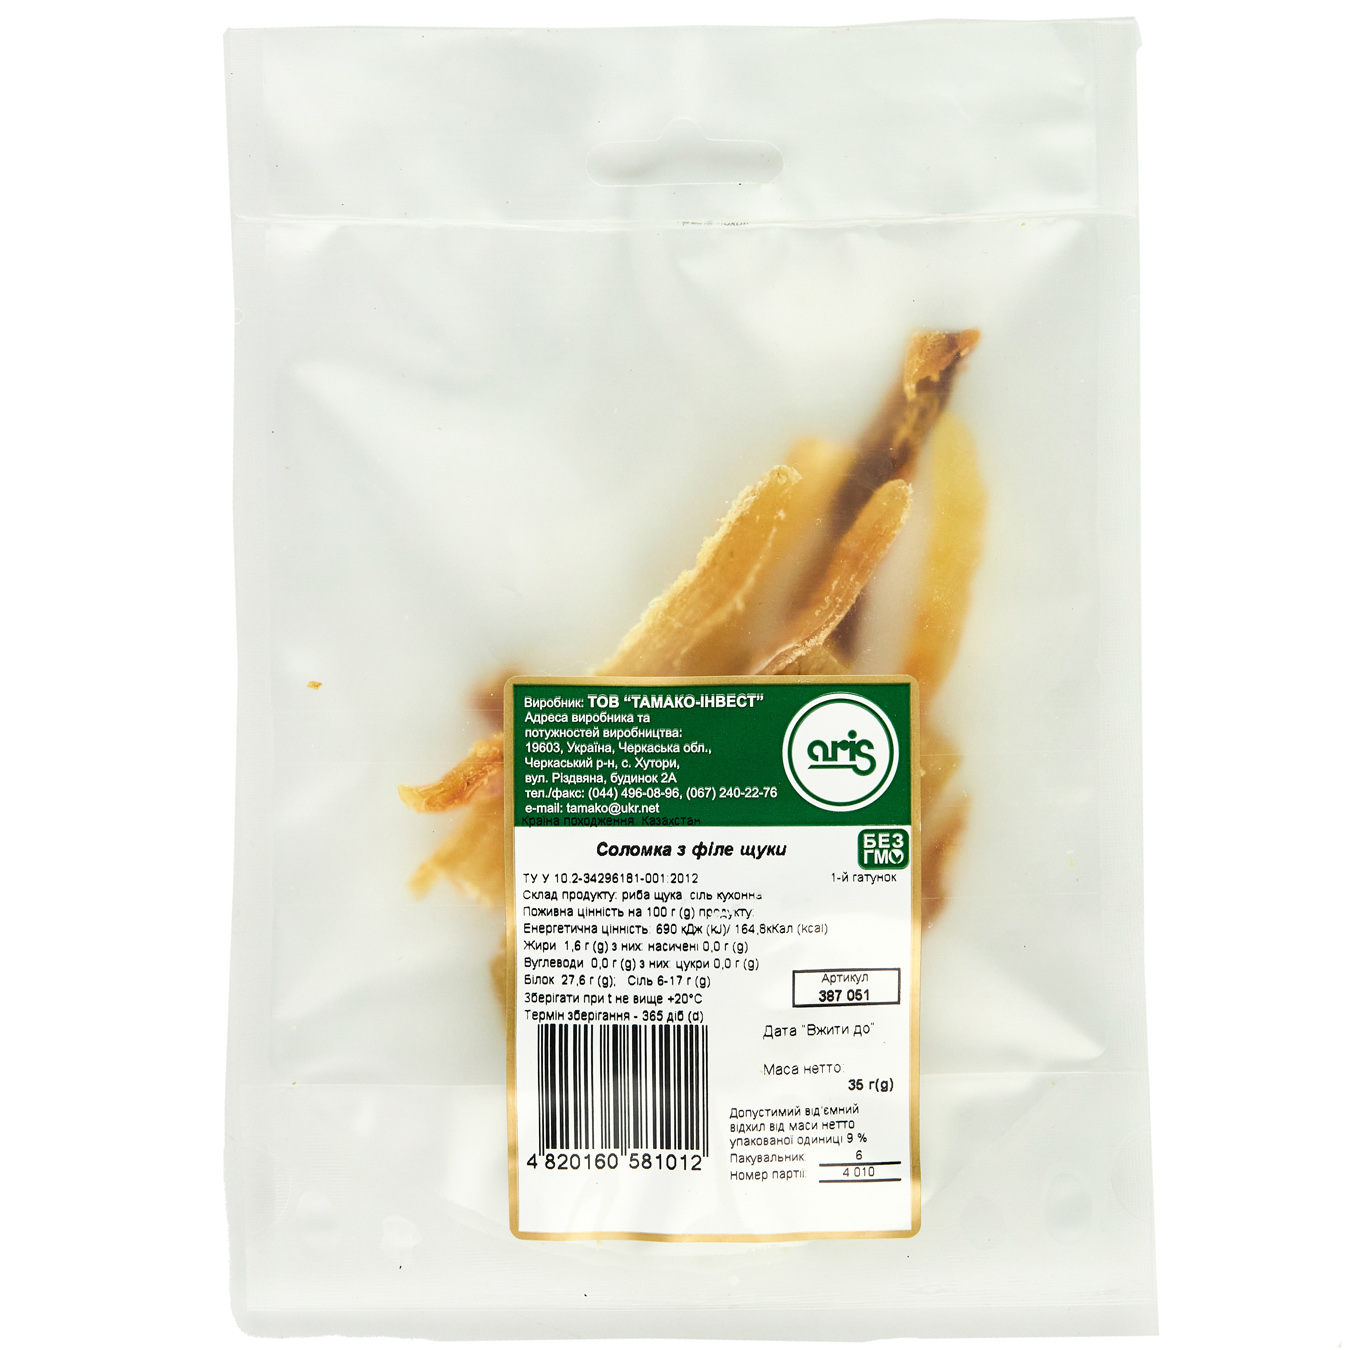 Aris pike fillet dried straw 35g 2